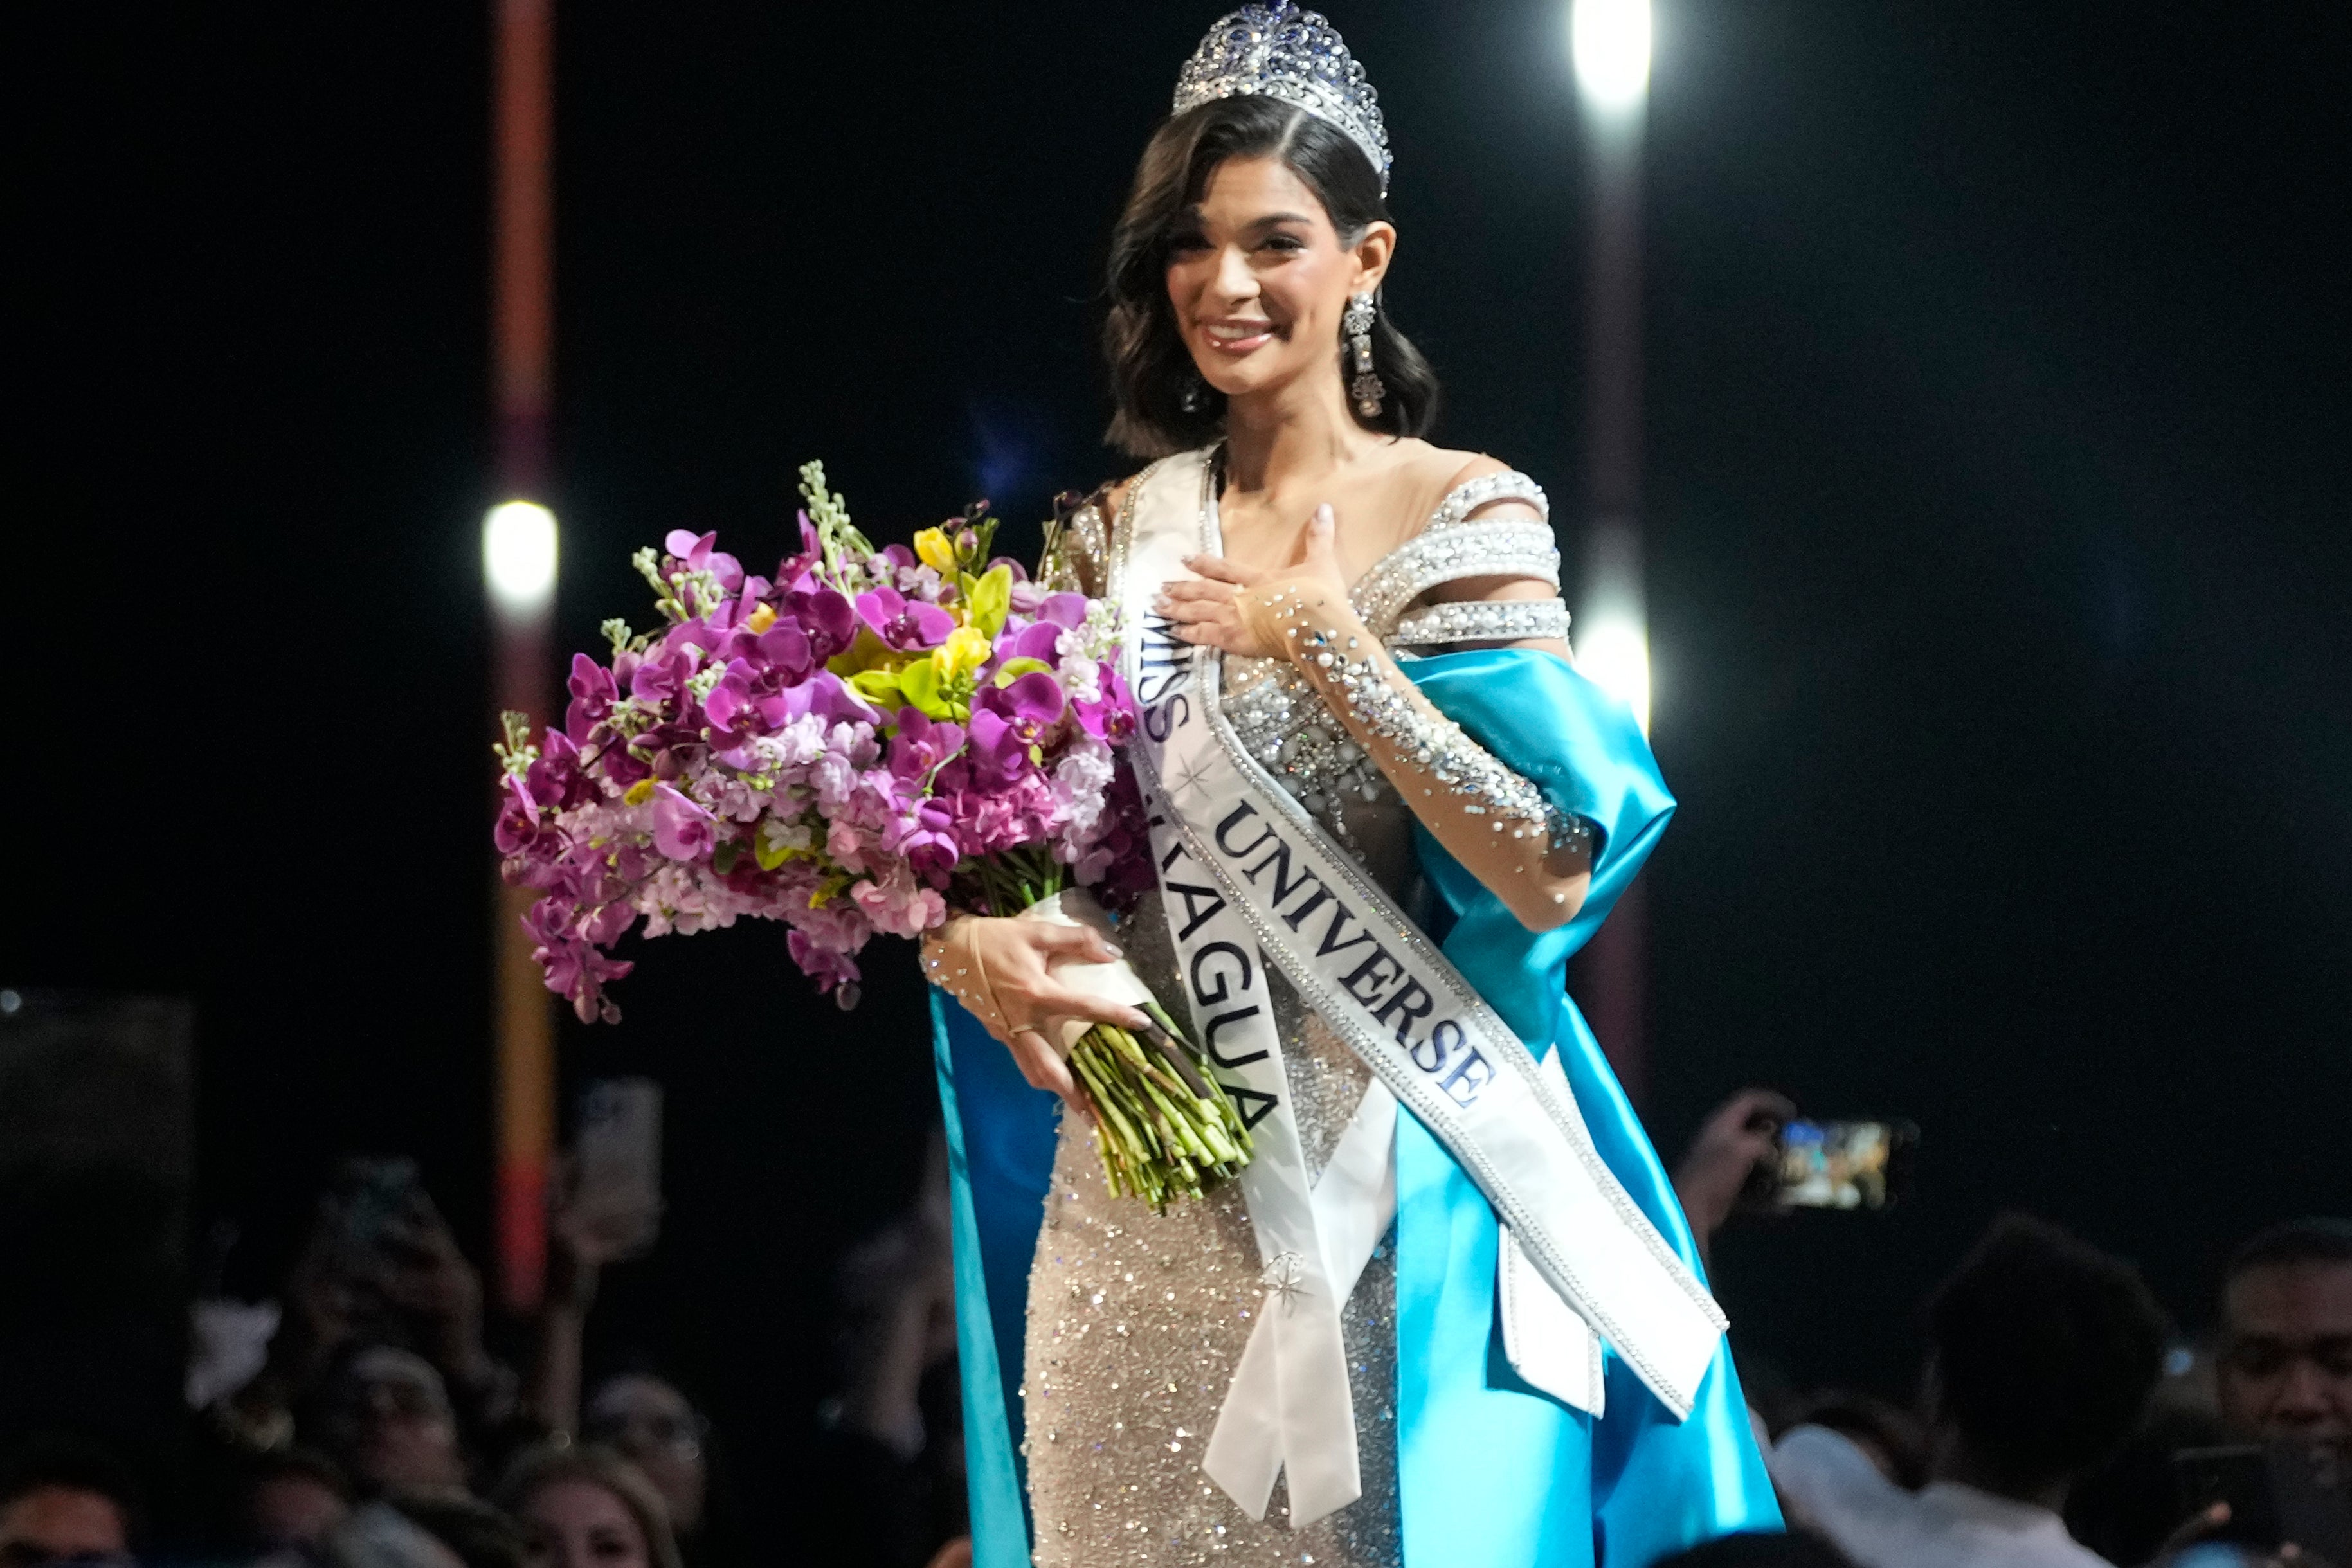 Sheynnis Palacio became the first Miss Nicaragua to win Miss Universe